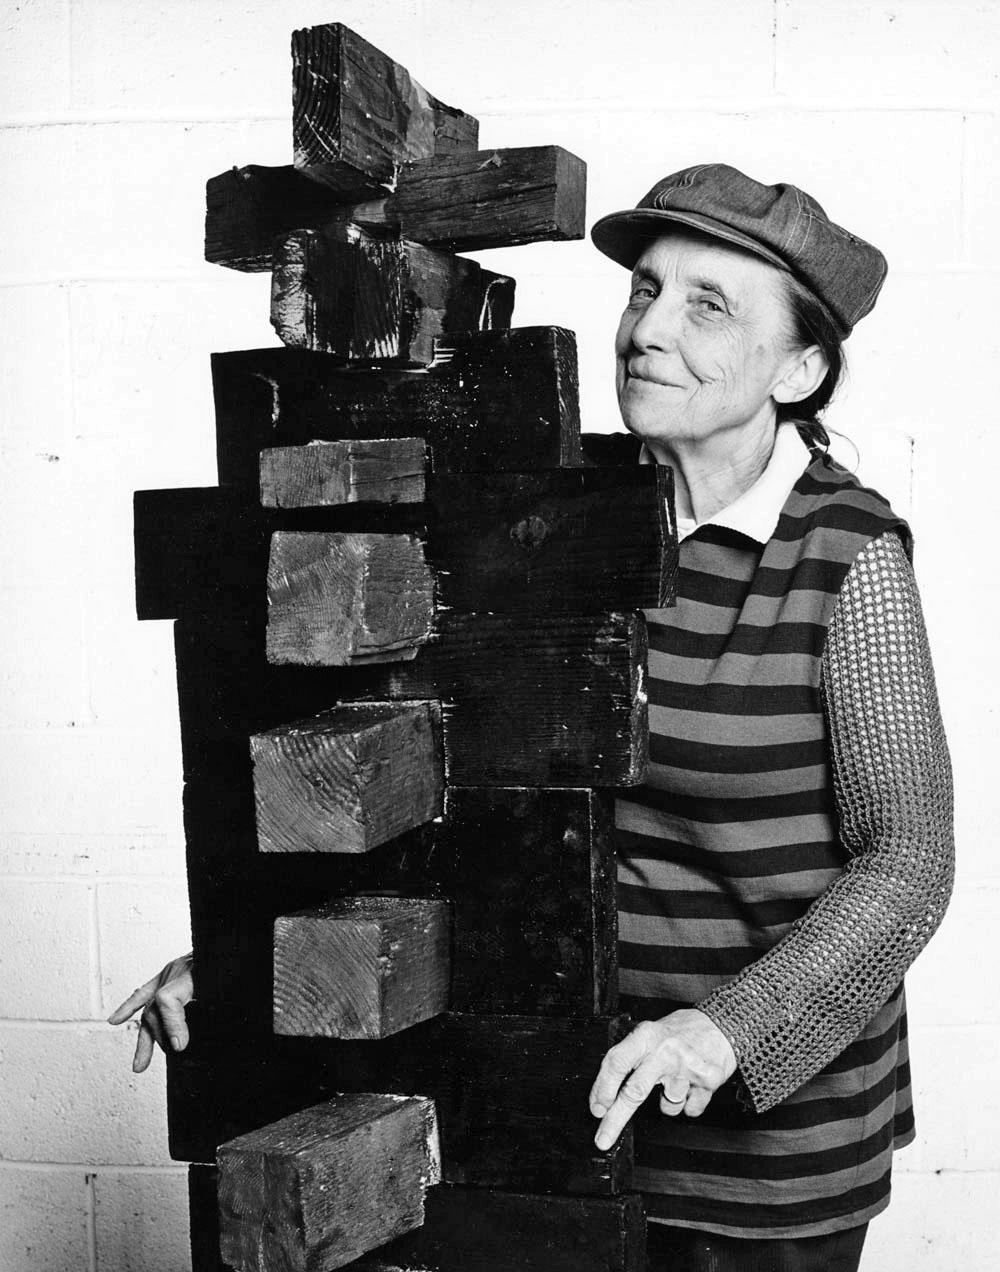 Sculptor Louise Bourgeois in her Manhattan studio, signed by Jack Mitchell